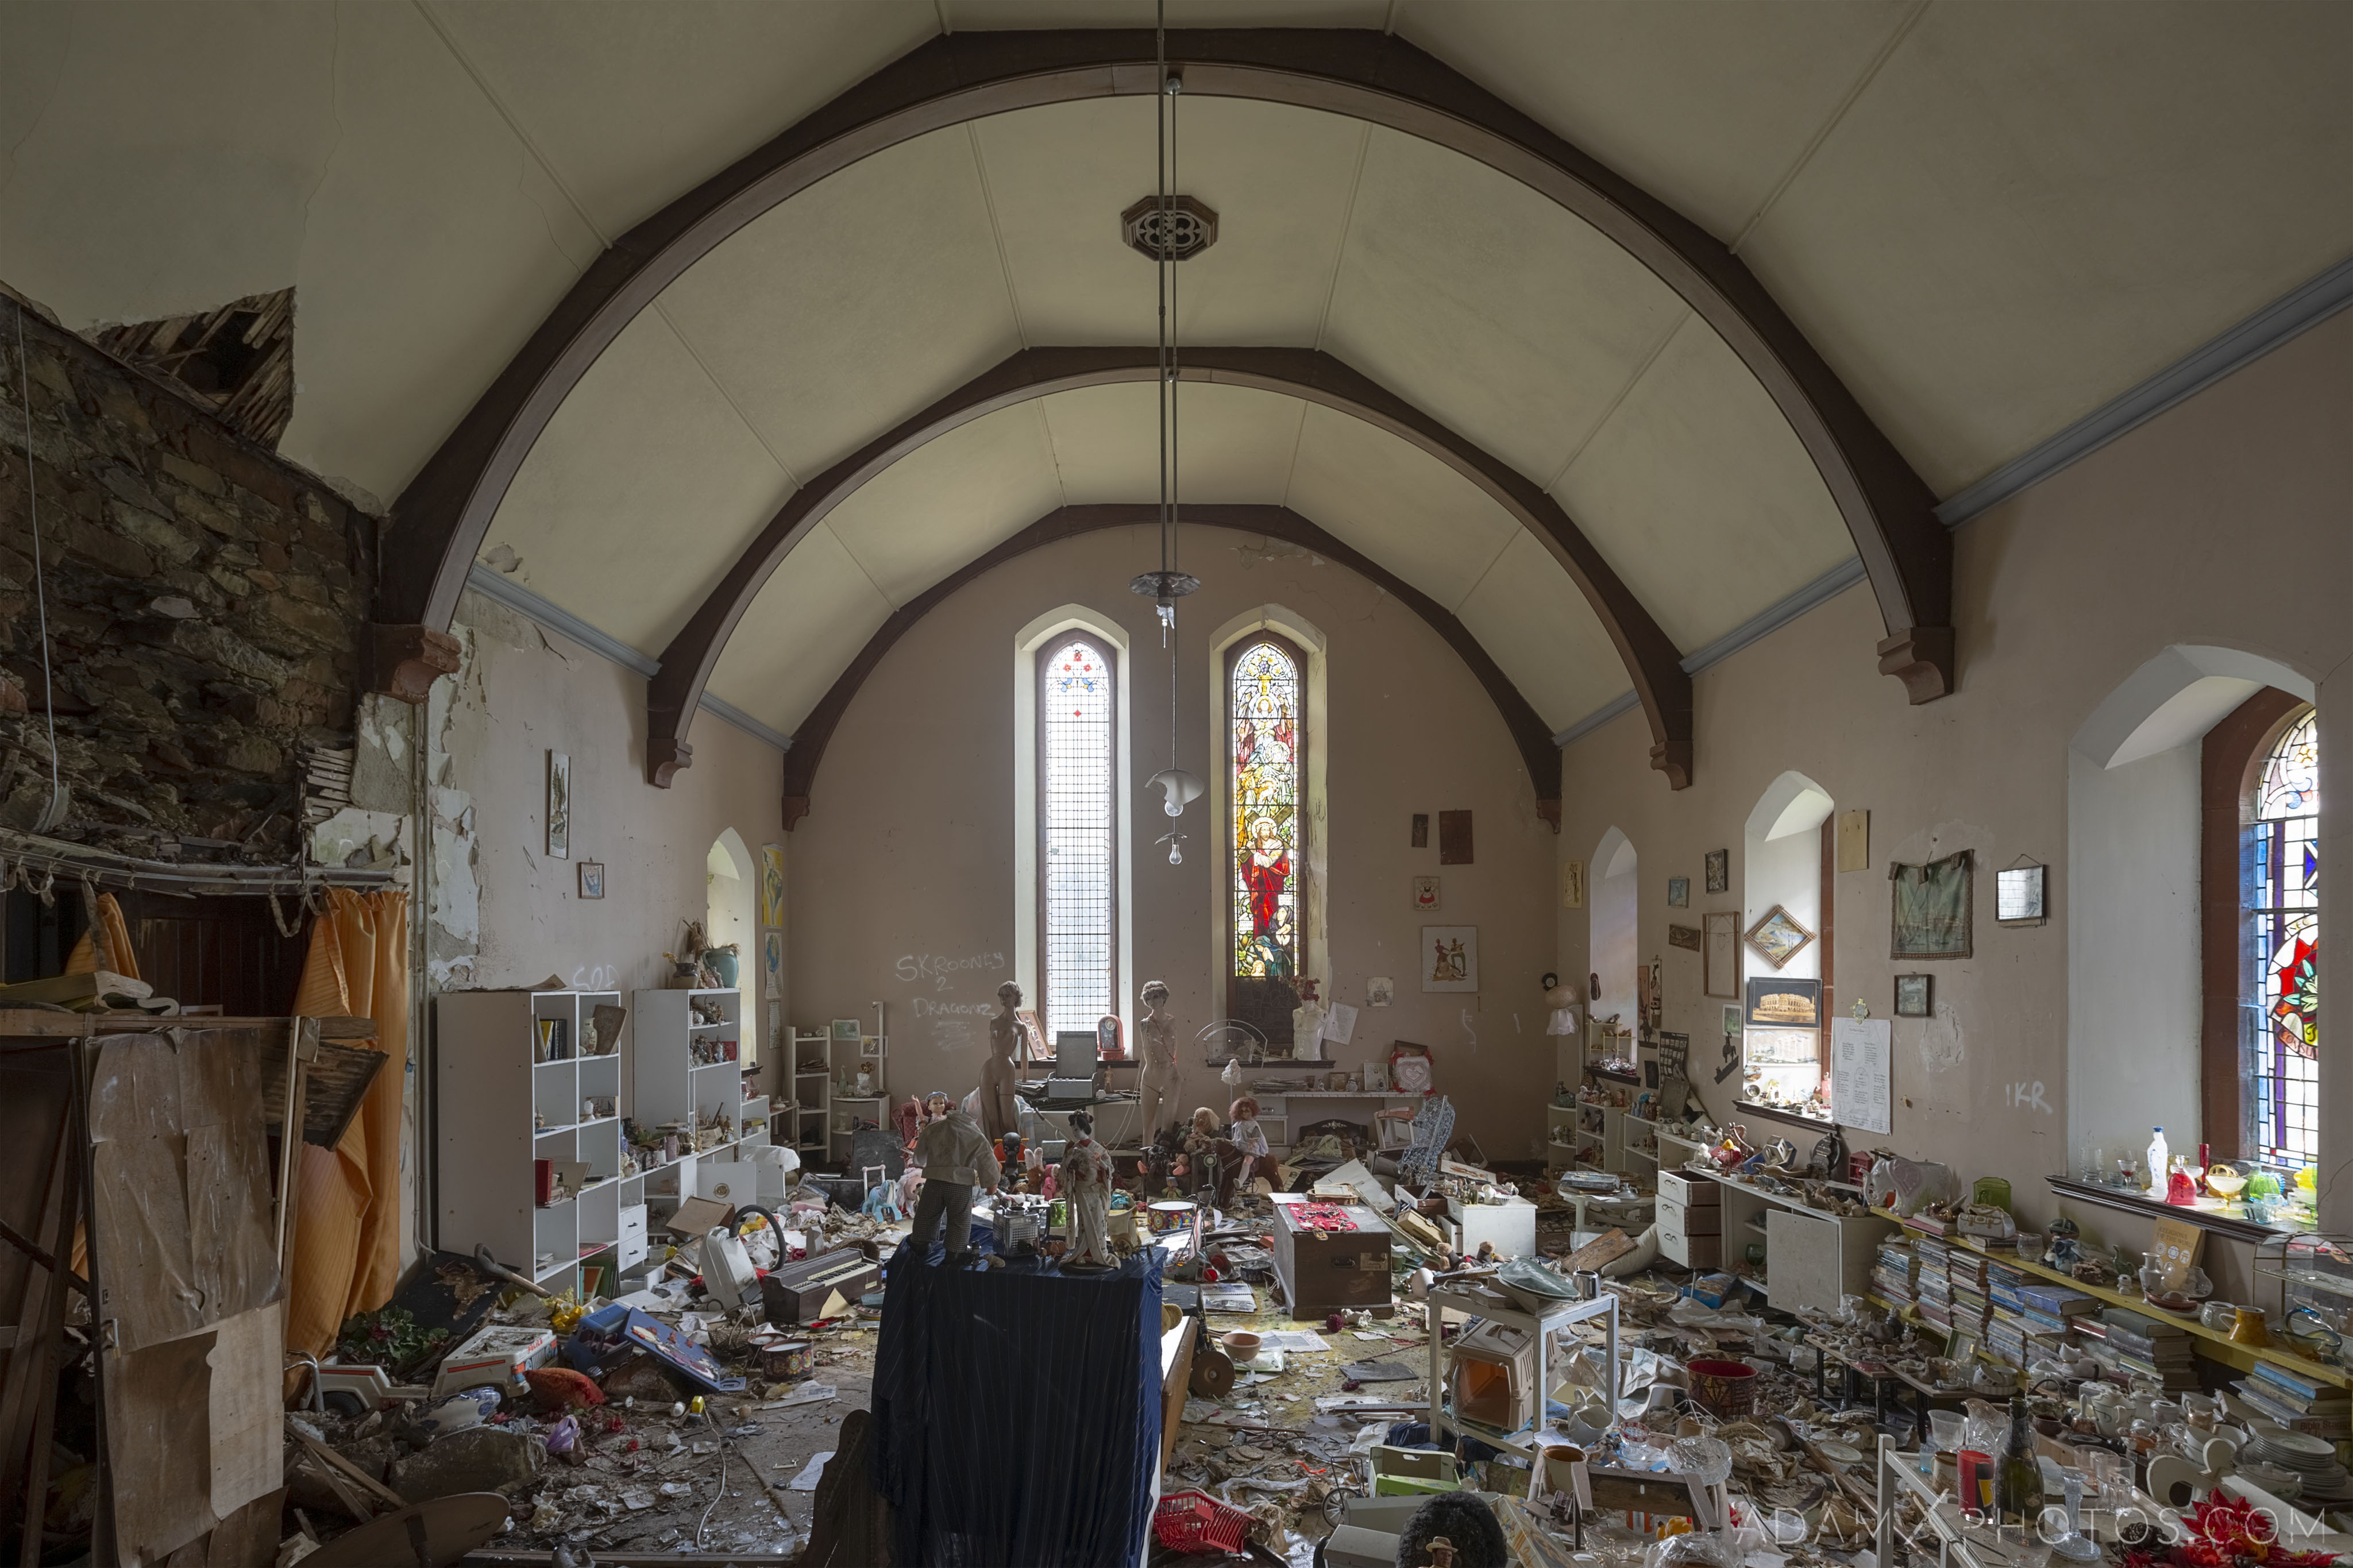 Main Hall soft toys ornaments books stained glass windows Elvanfoot Parish Church Hoarder Hoarders Church Adam X Urbex Urban Exploration Access 2018 Abandoned decay lost forgotten derelict location creepy haunting eerie